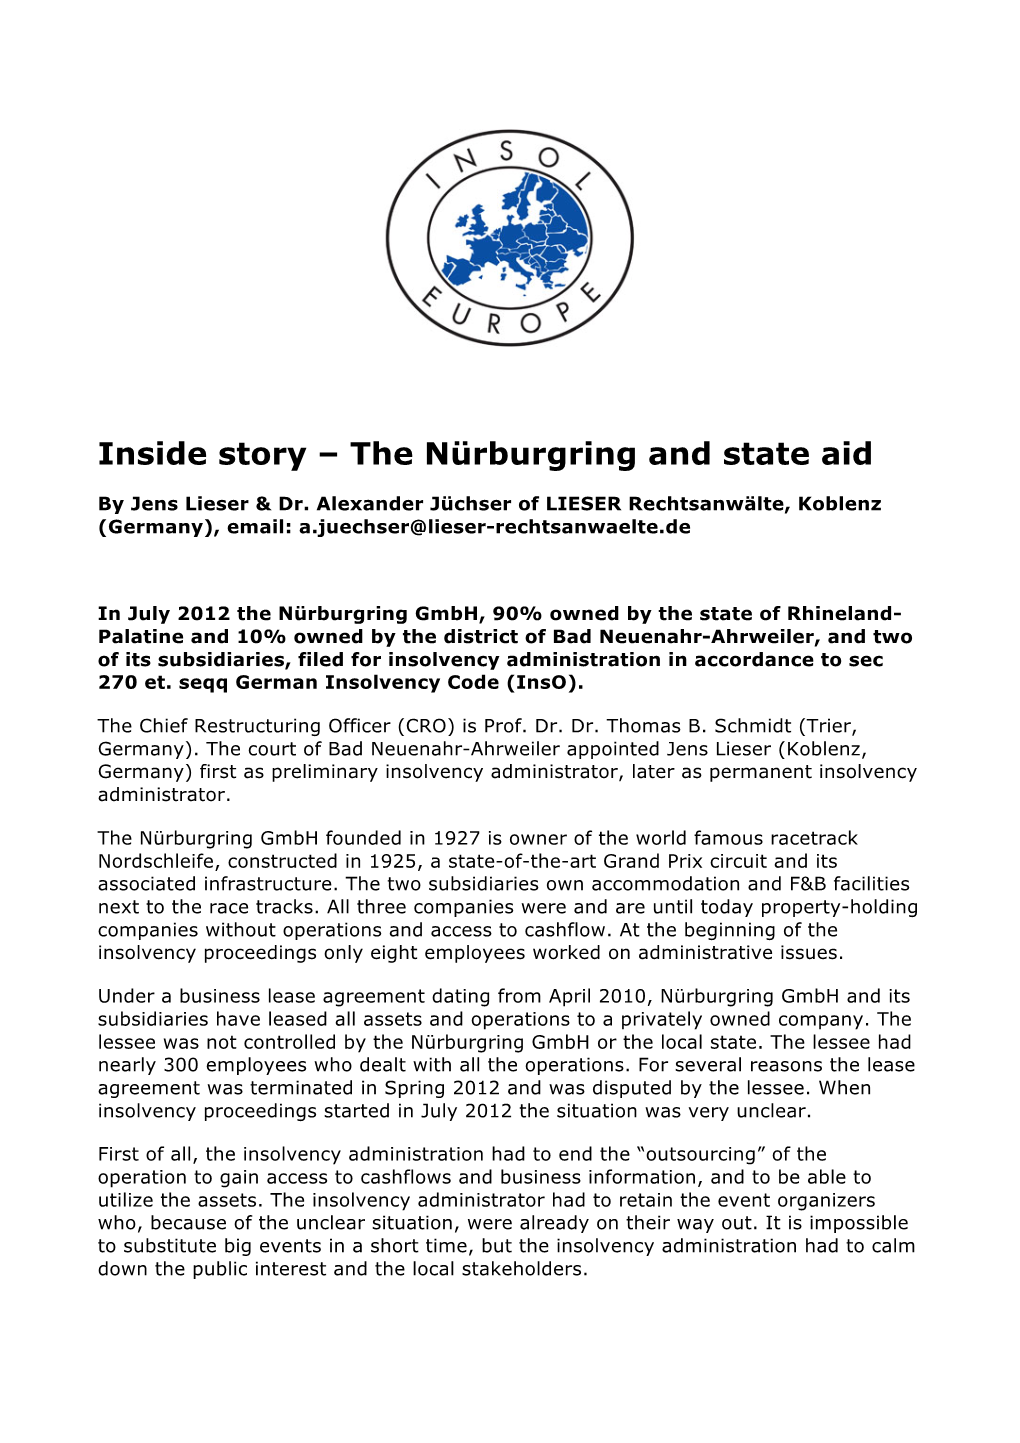 Inside Story – the Nürburgring and State Aid